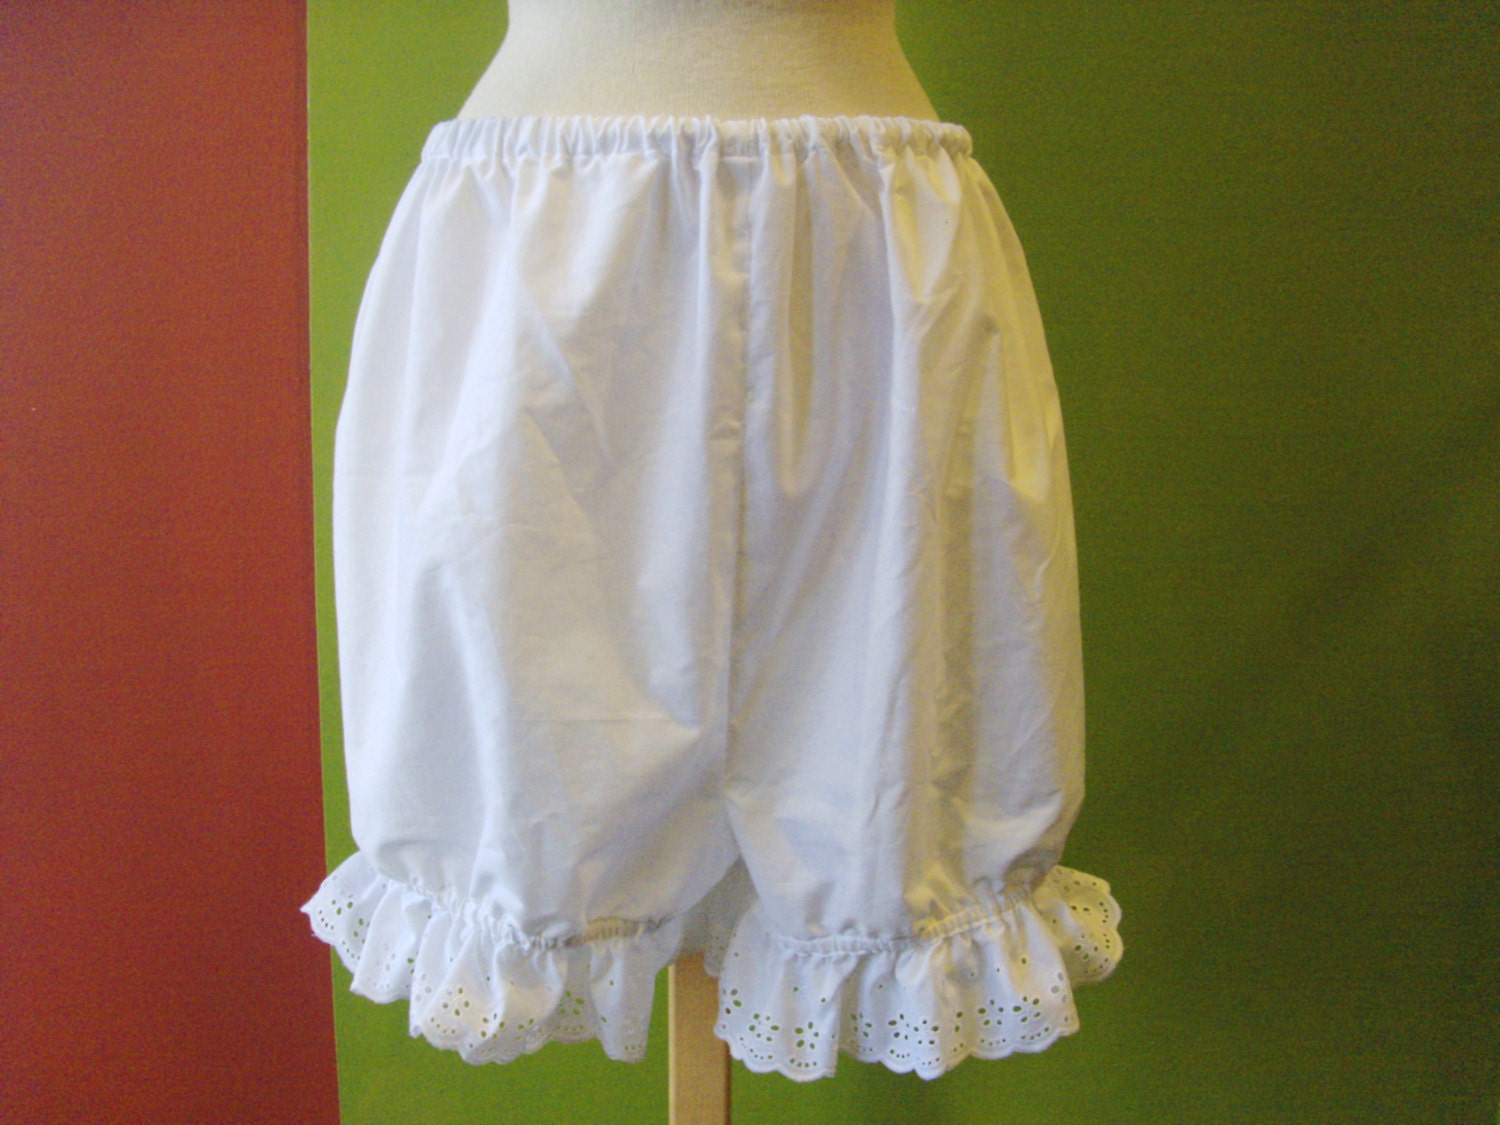 Bloomers to be worn under full skirts